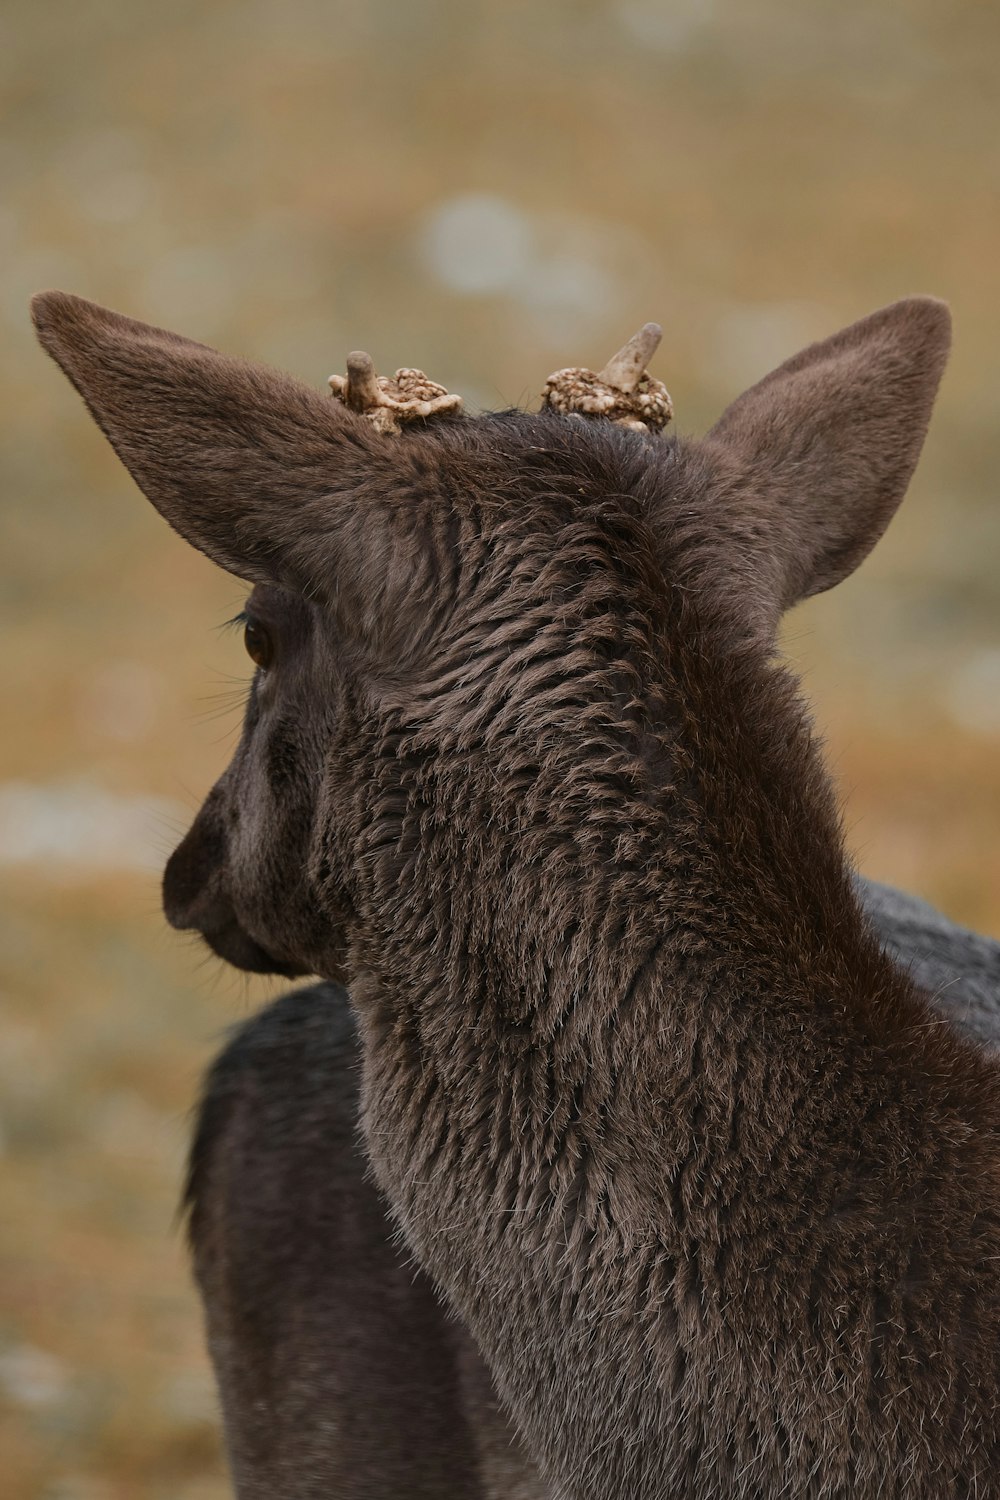 a close up of a goat with a bird on its head